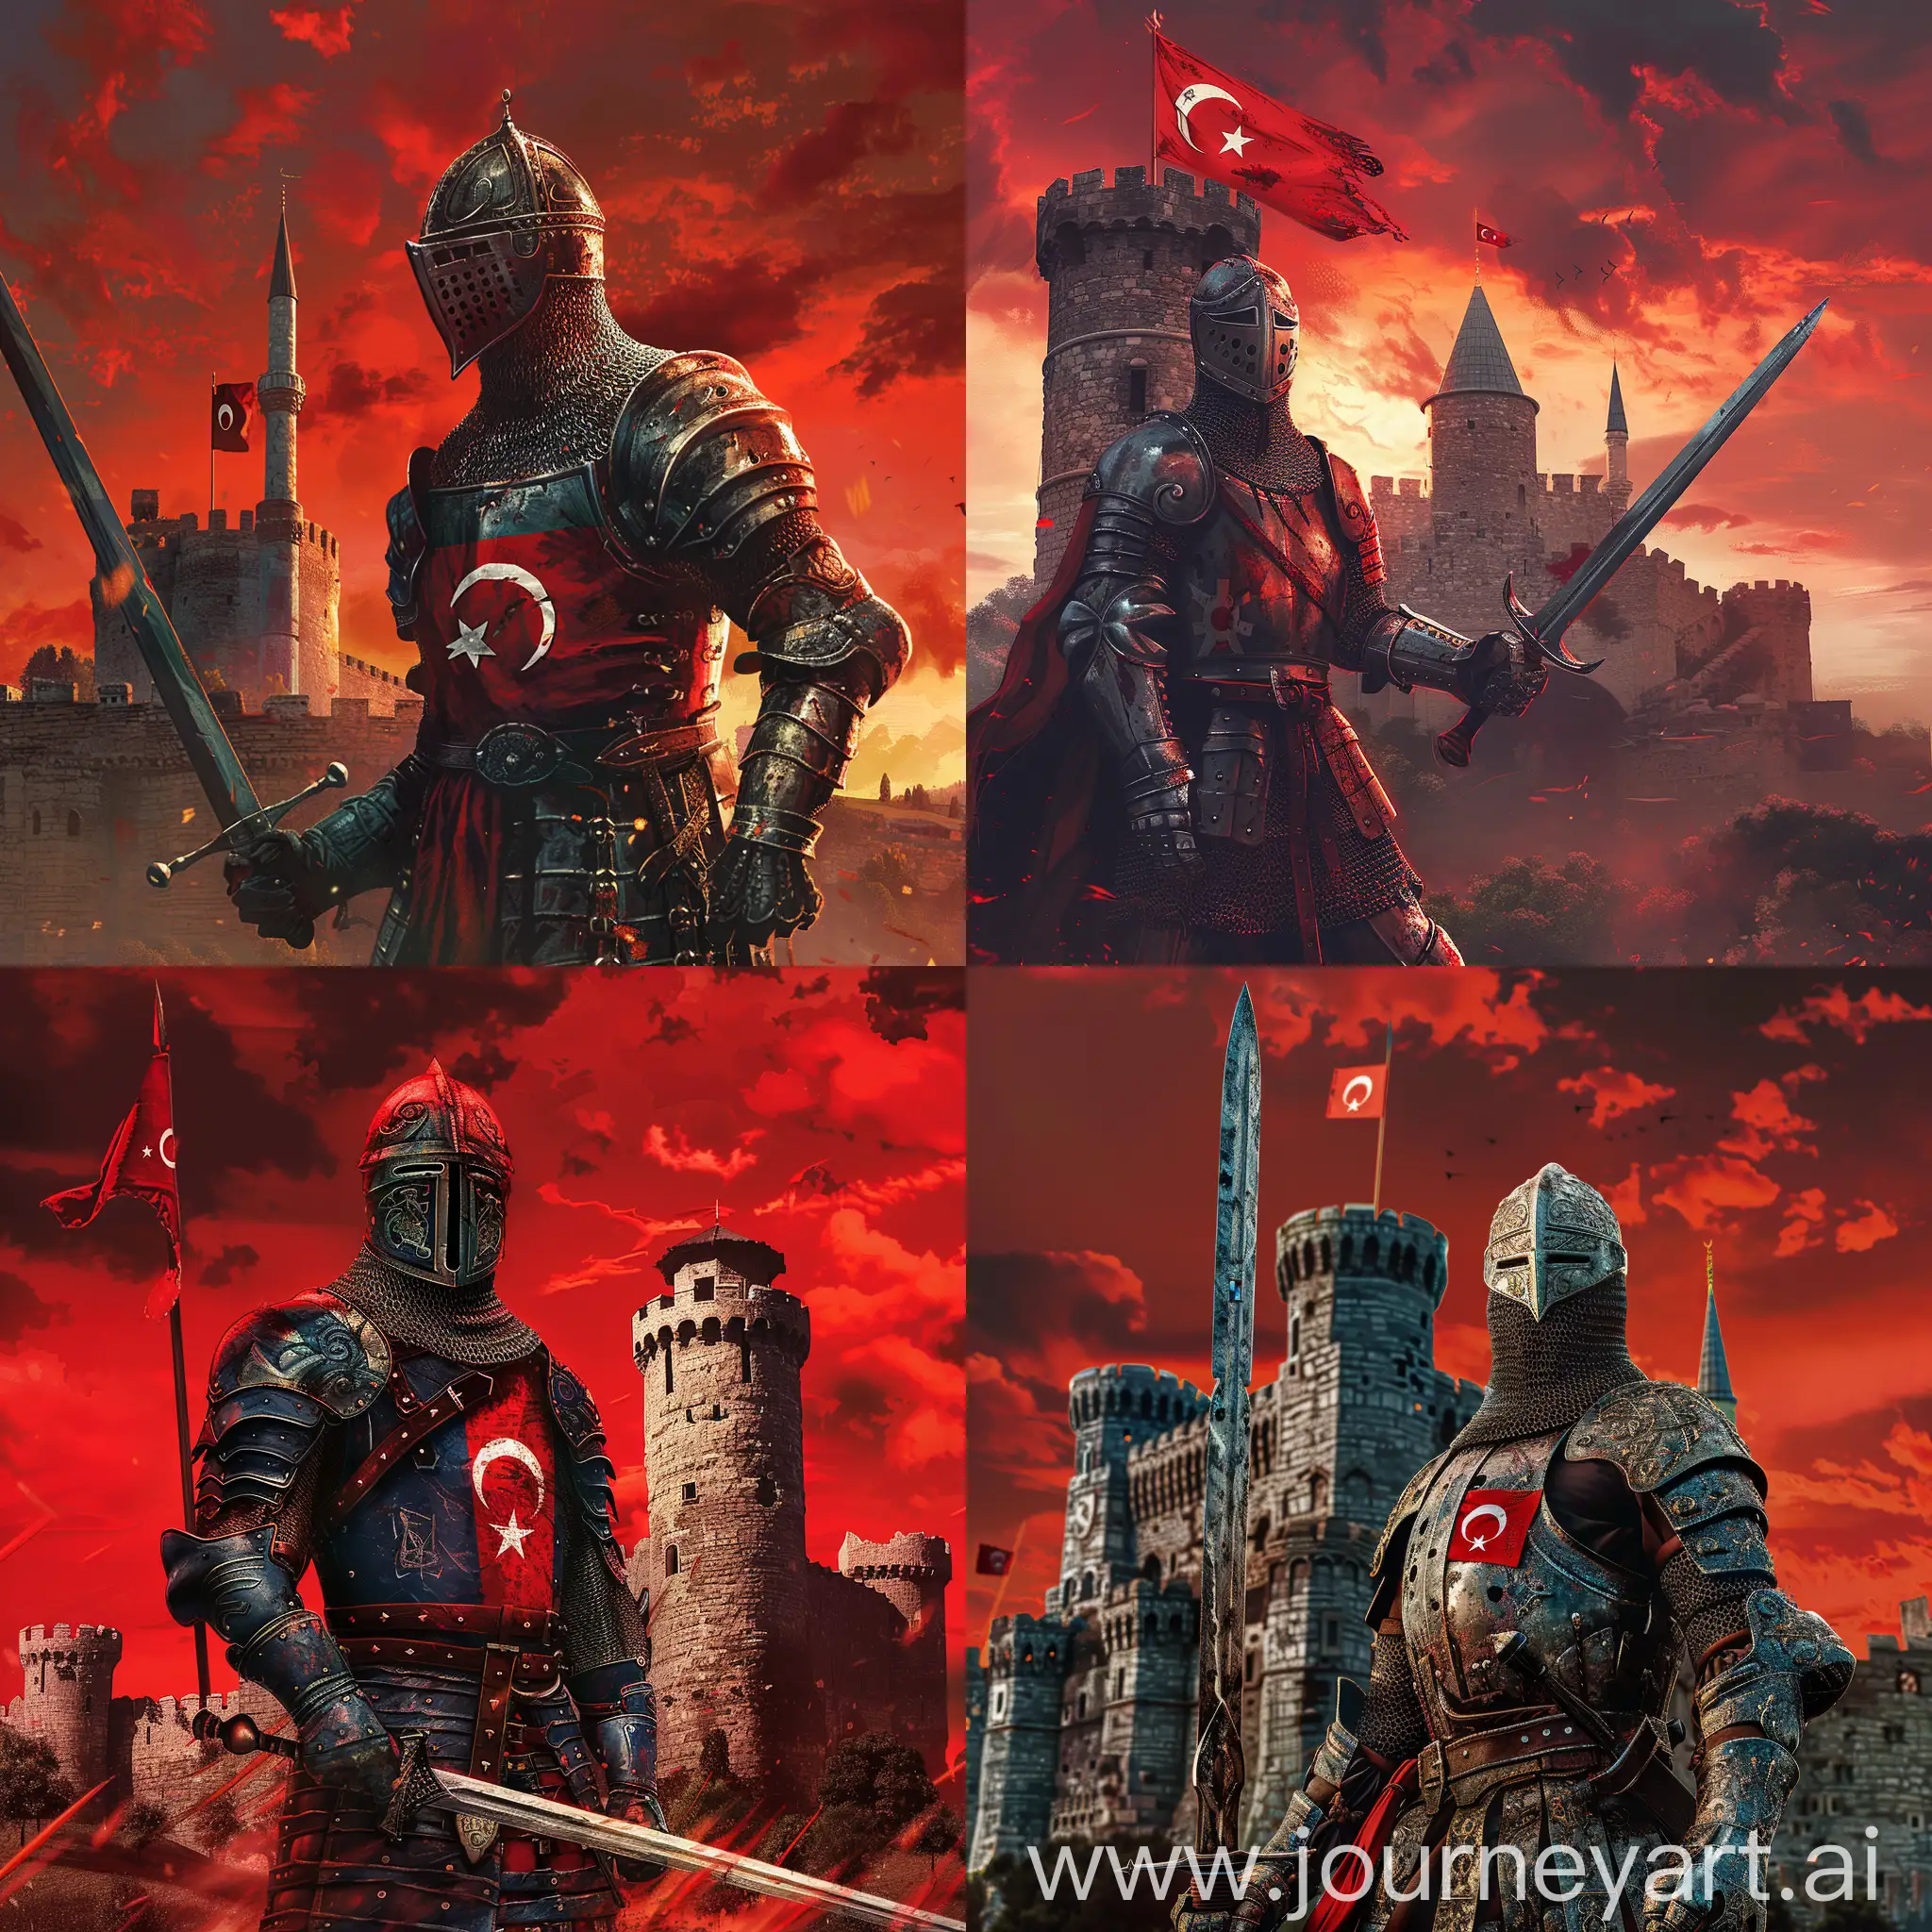 Turkish Knight, Traditional Armor with the details of turkish flag, in front of a medieval castle, holding sword, turkic sword, red sky, heroic stance, photorealistic style